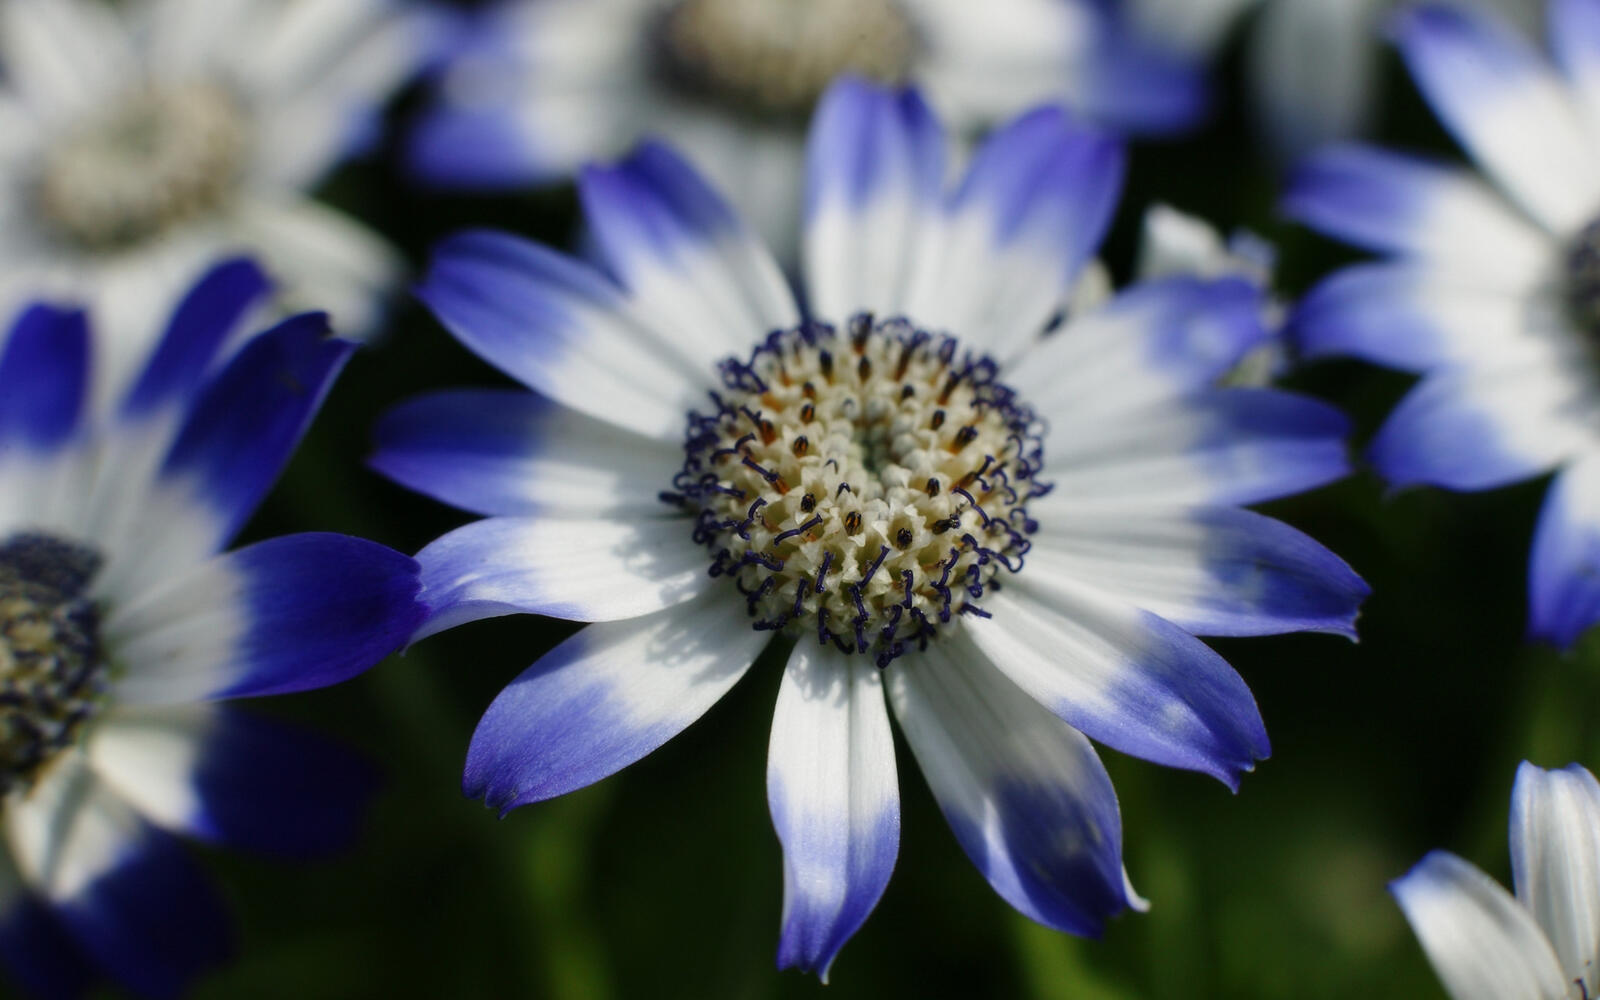 Wallpapers flowers petals white and blue on the desktop